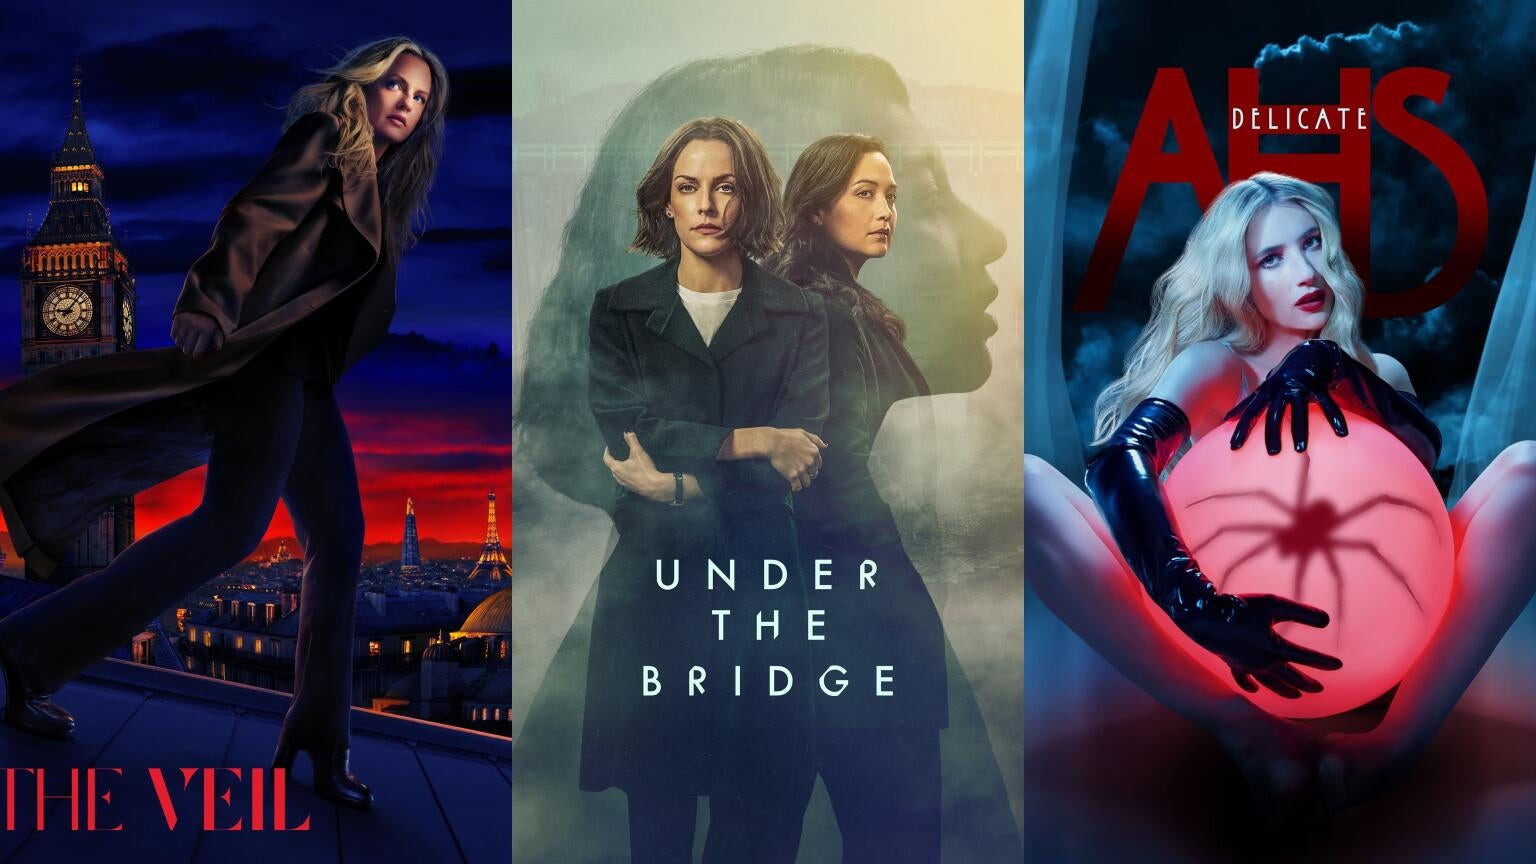 Poster's for FX's "The Veil," Hulu's "Under the Bridge," and FX's "American Horror Story: Delicate"